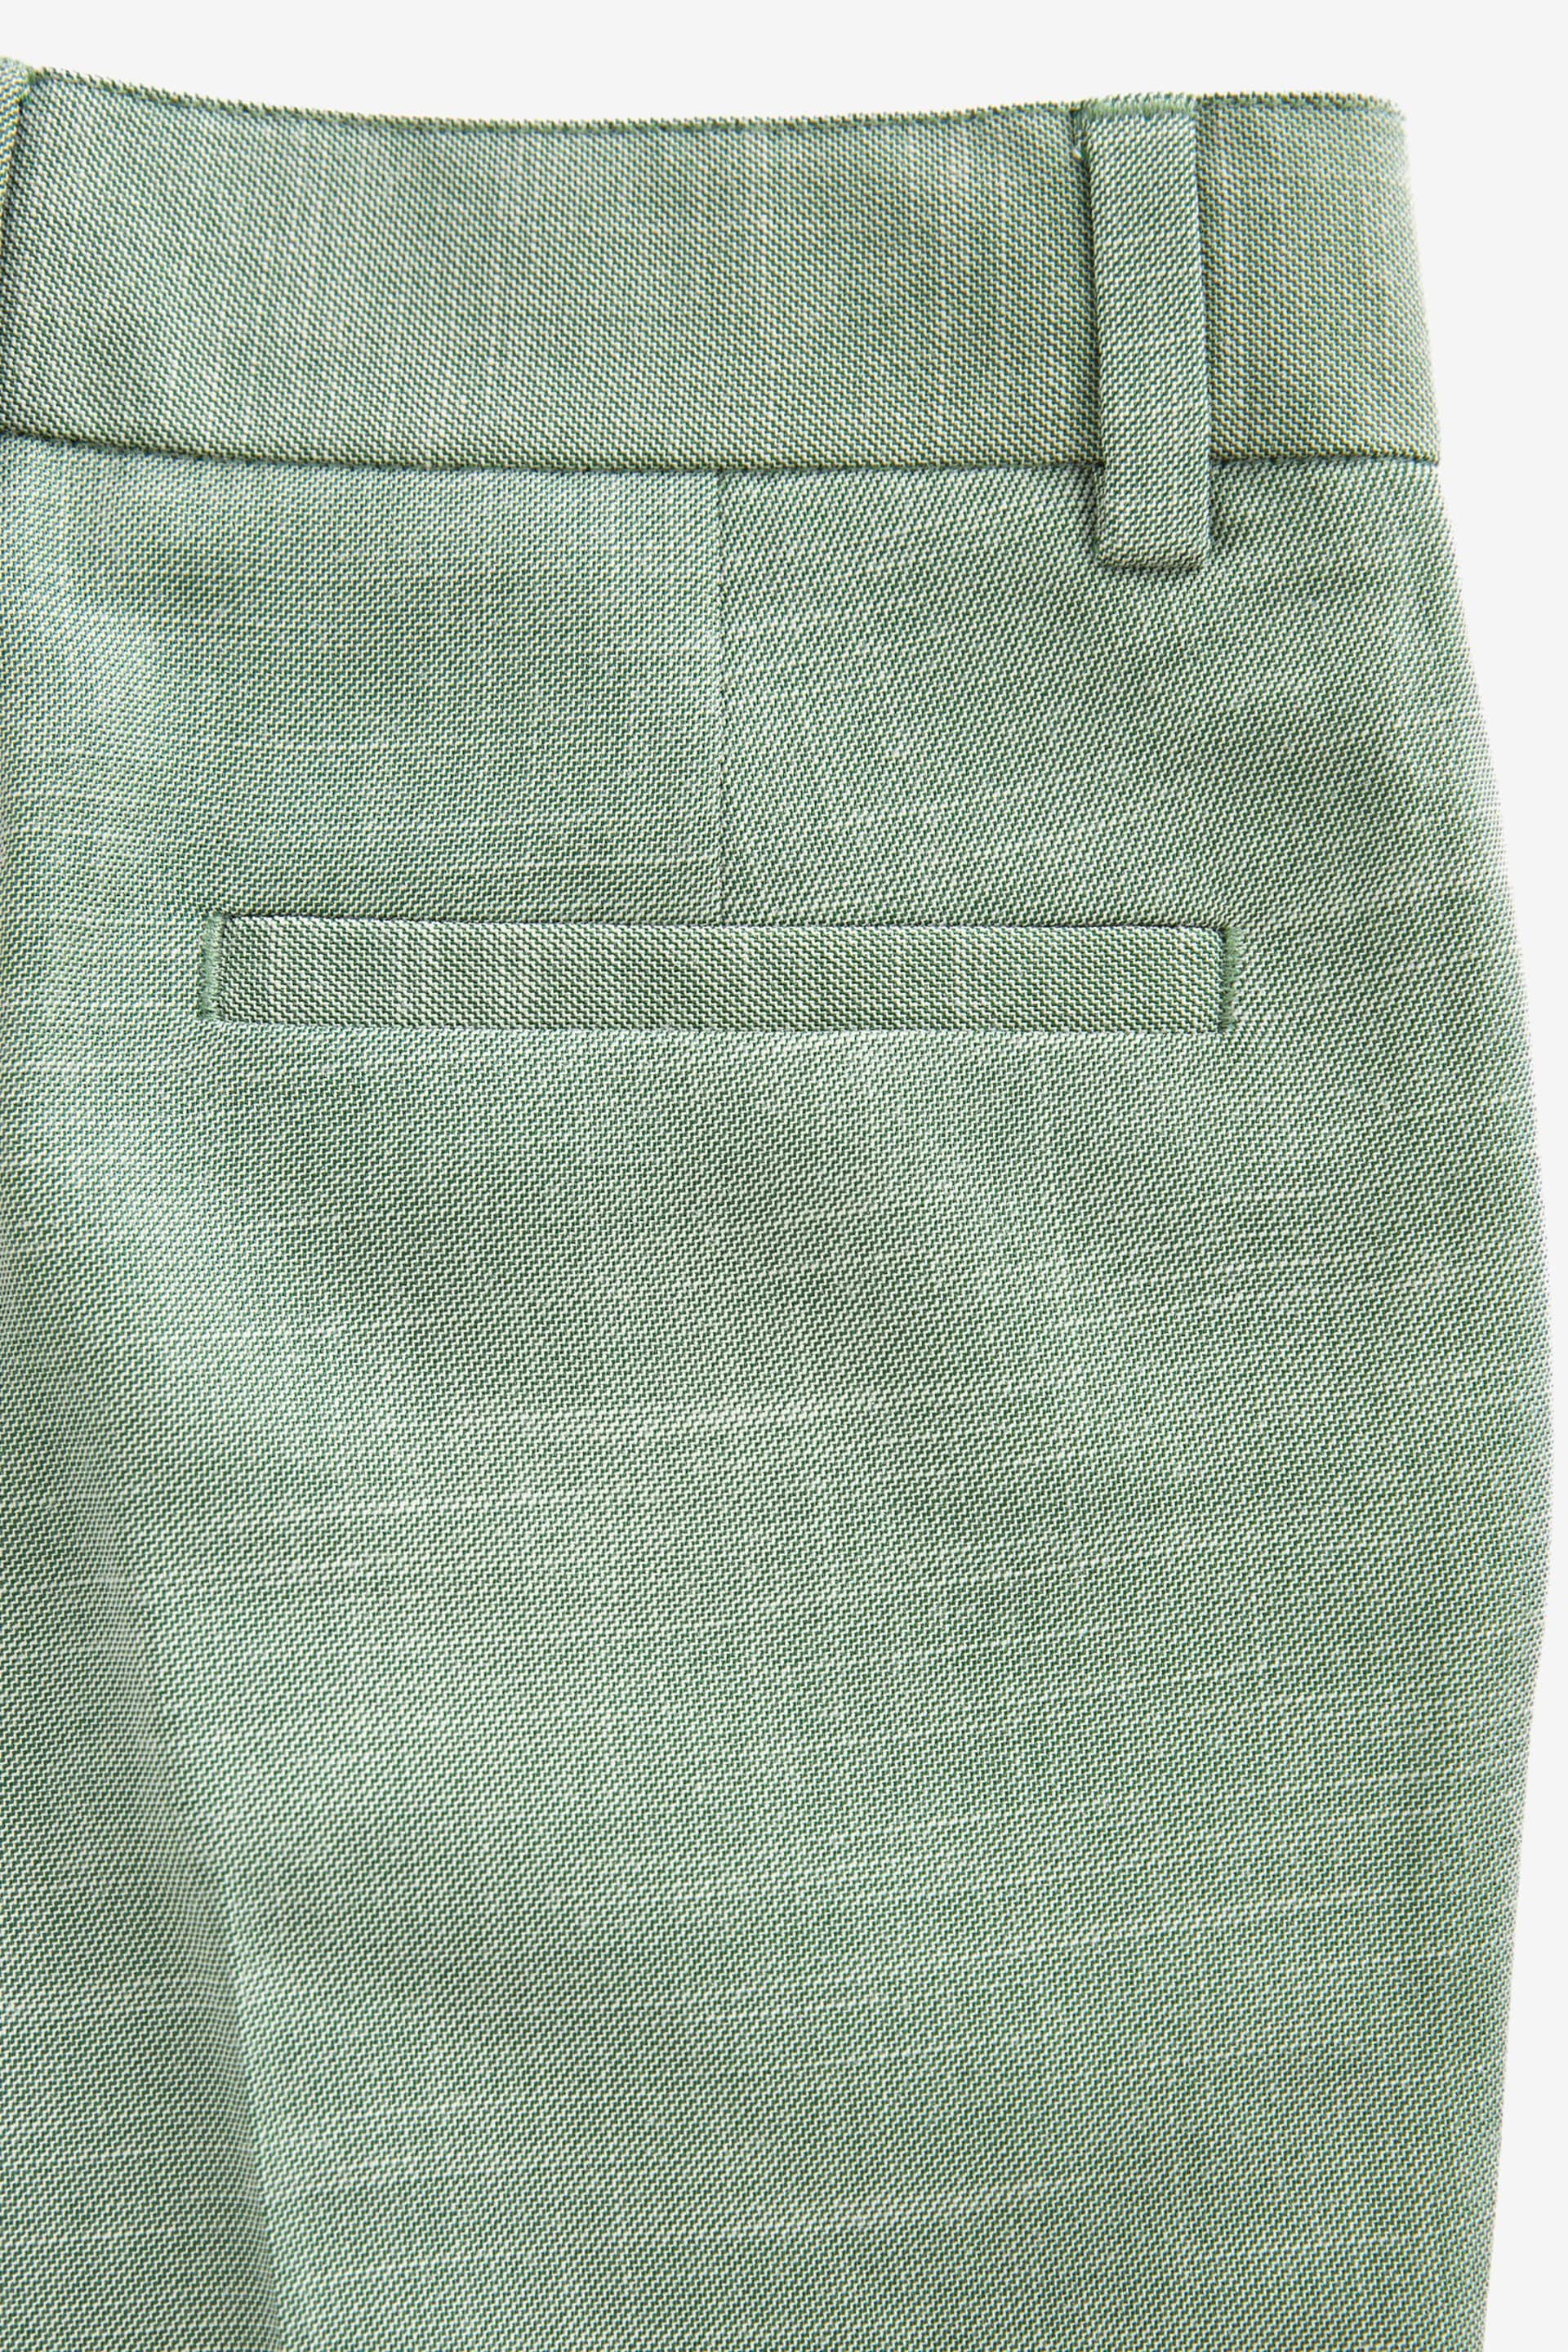 Baker by Ted Baker Suit Trousers - Image 11 of 12